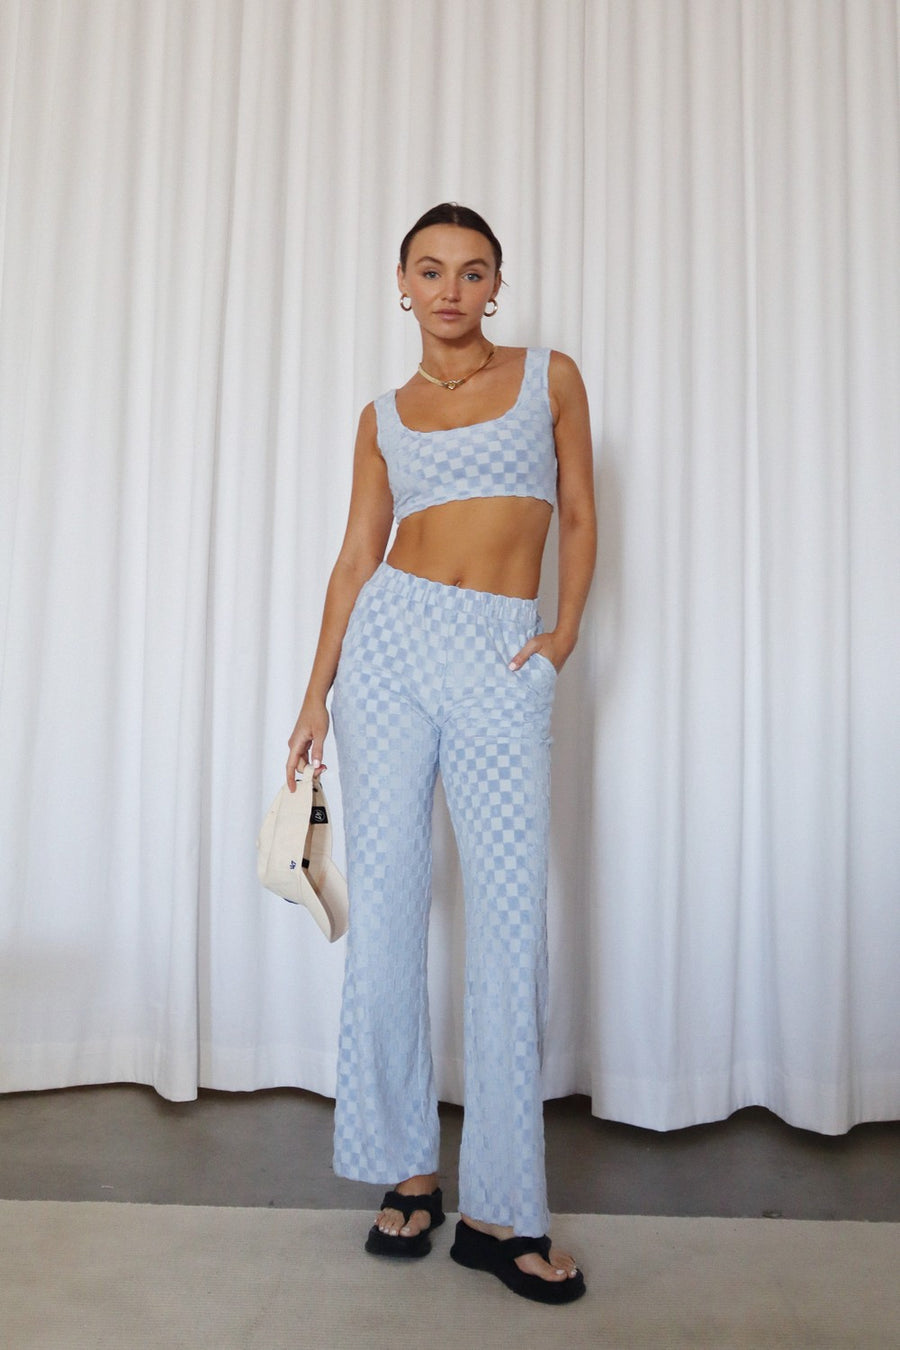 Baby blue checkered pants. 